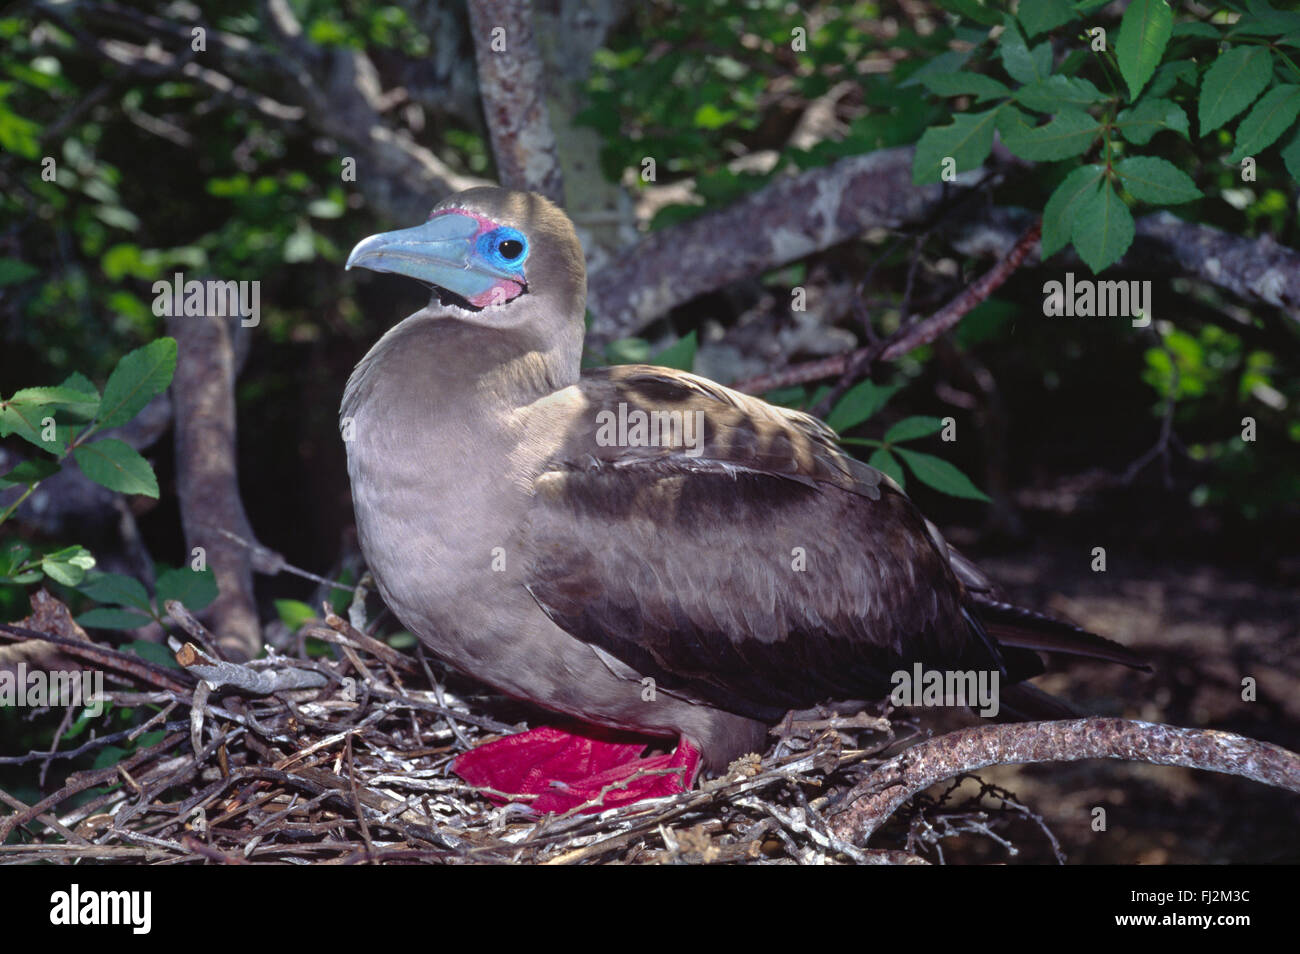 RED-FOOTED BOOBY BIRD (Sula sula), the smallest of the Galapagos boobies -  TOWER ISLAND, GALAPAGOS ISLANDS, ECUADOR Stock Photo - Alamy